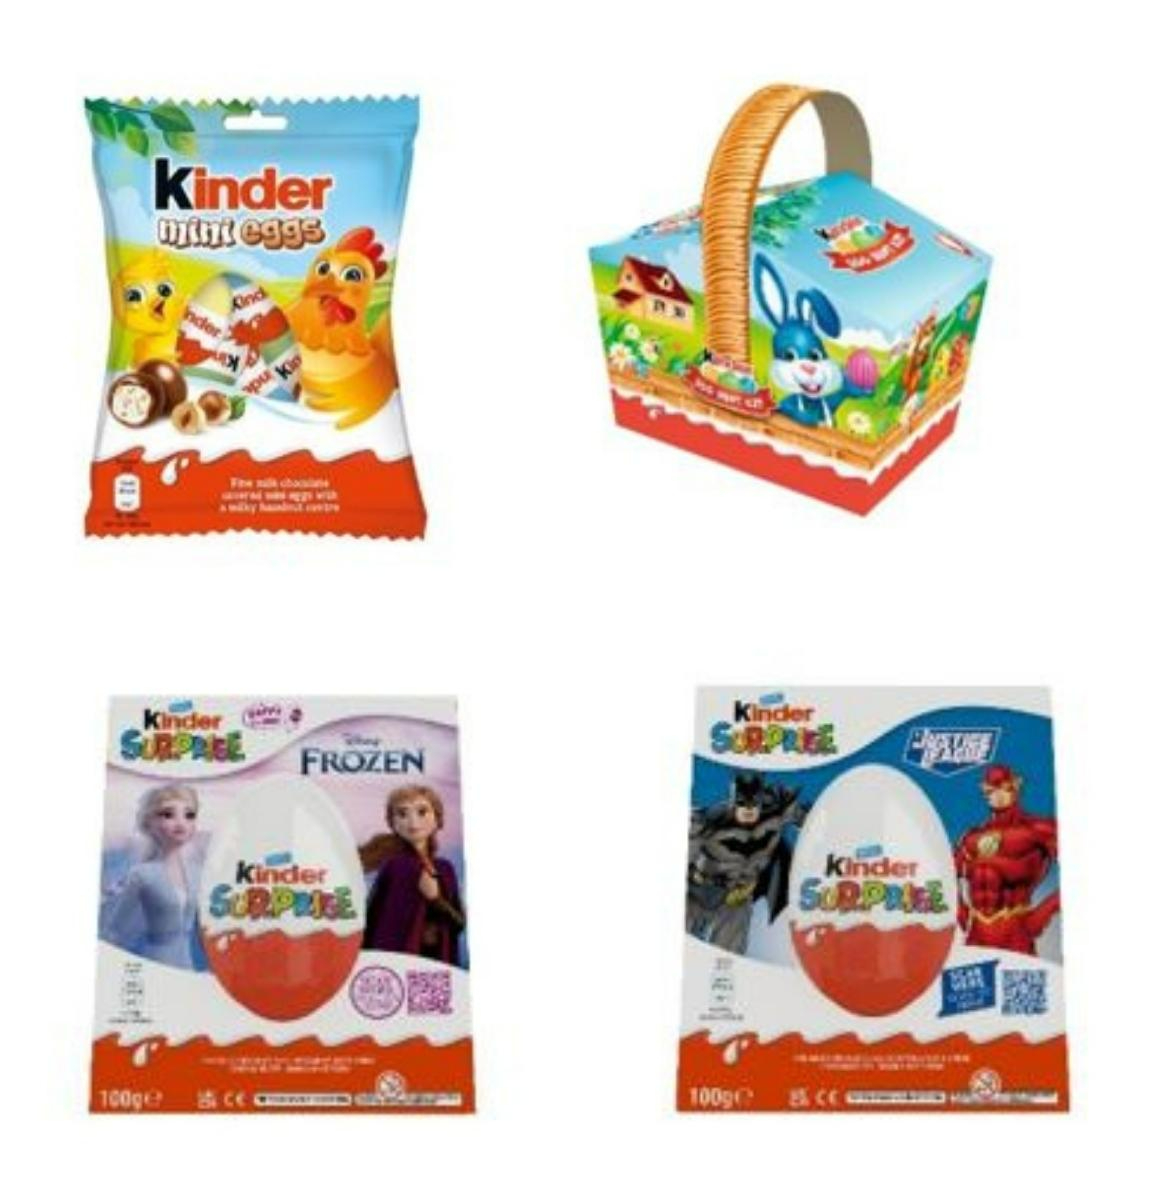 Kinder products included in FSAI recall. Image: FSAI